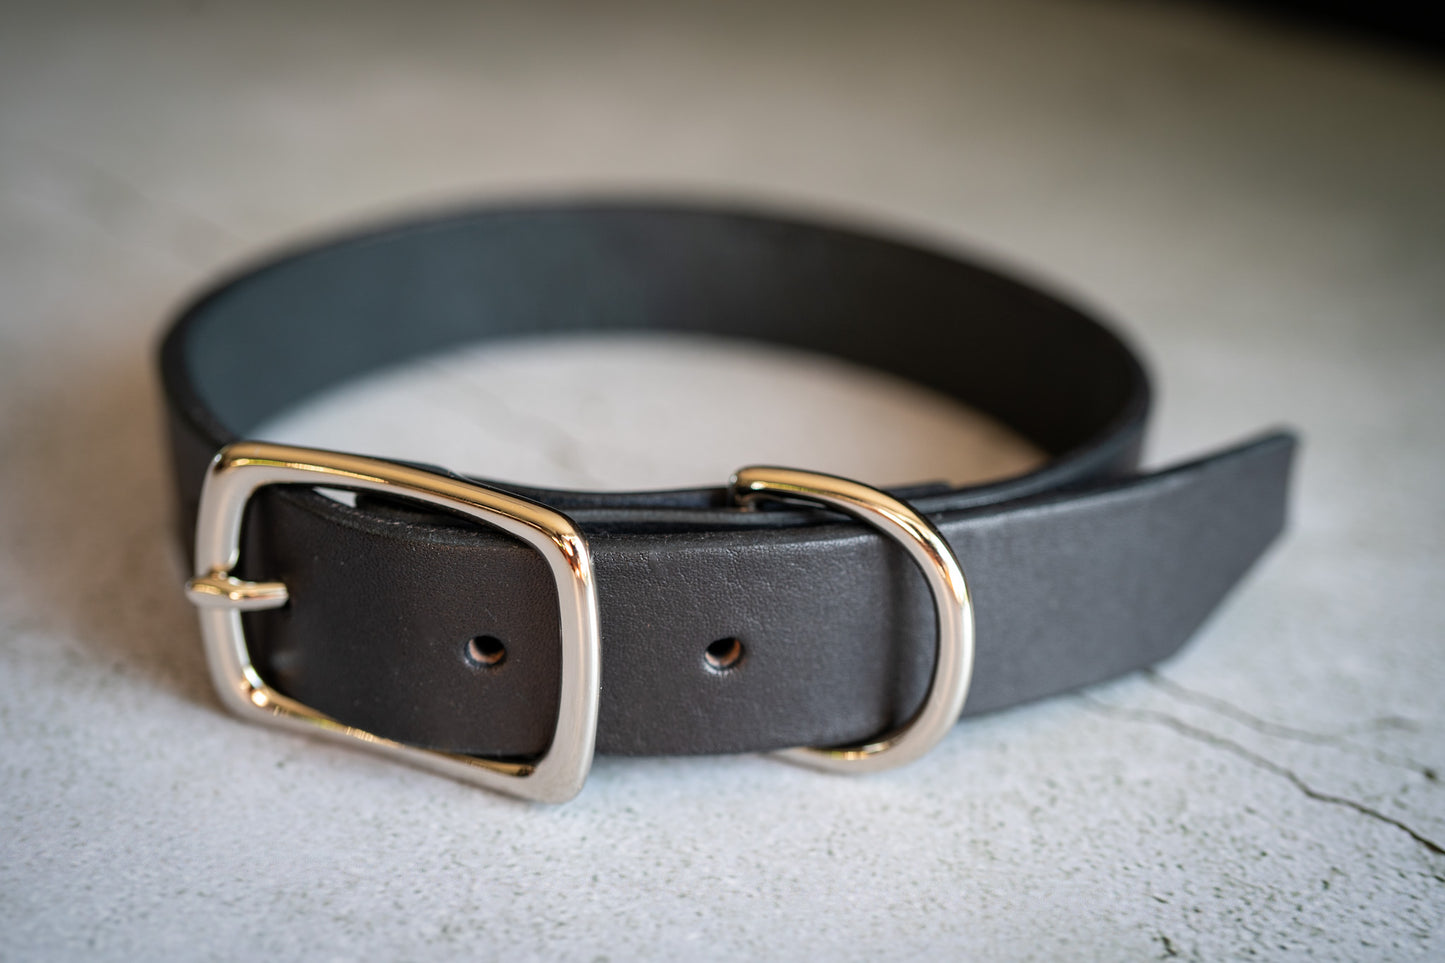 Side view of the black vegetable tanned leather dog collar 1 inch.